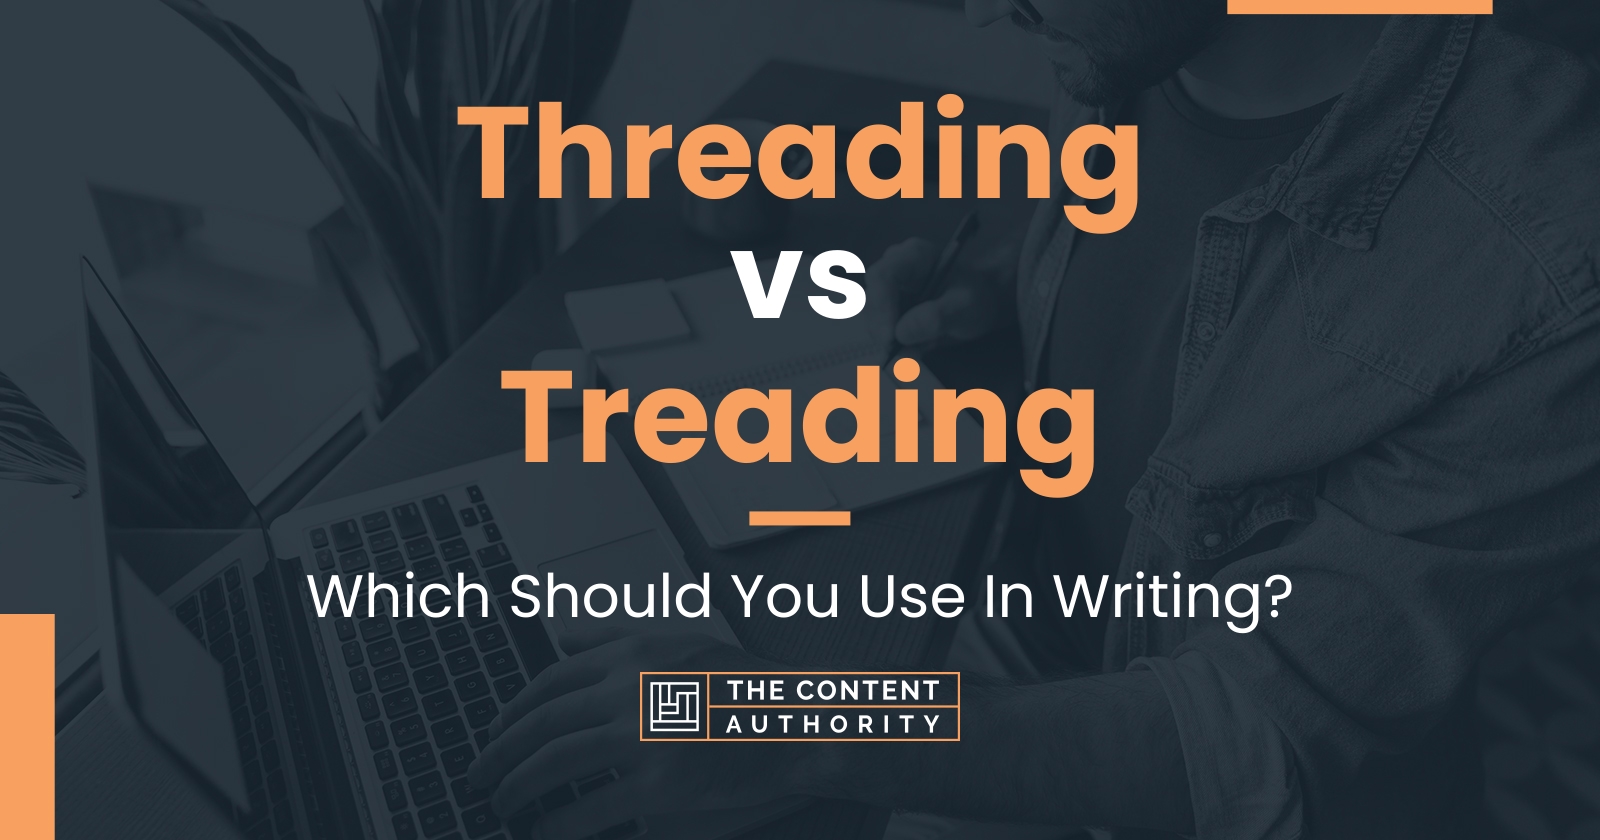 Threading vs Treading: Which Should You Use In Writing?